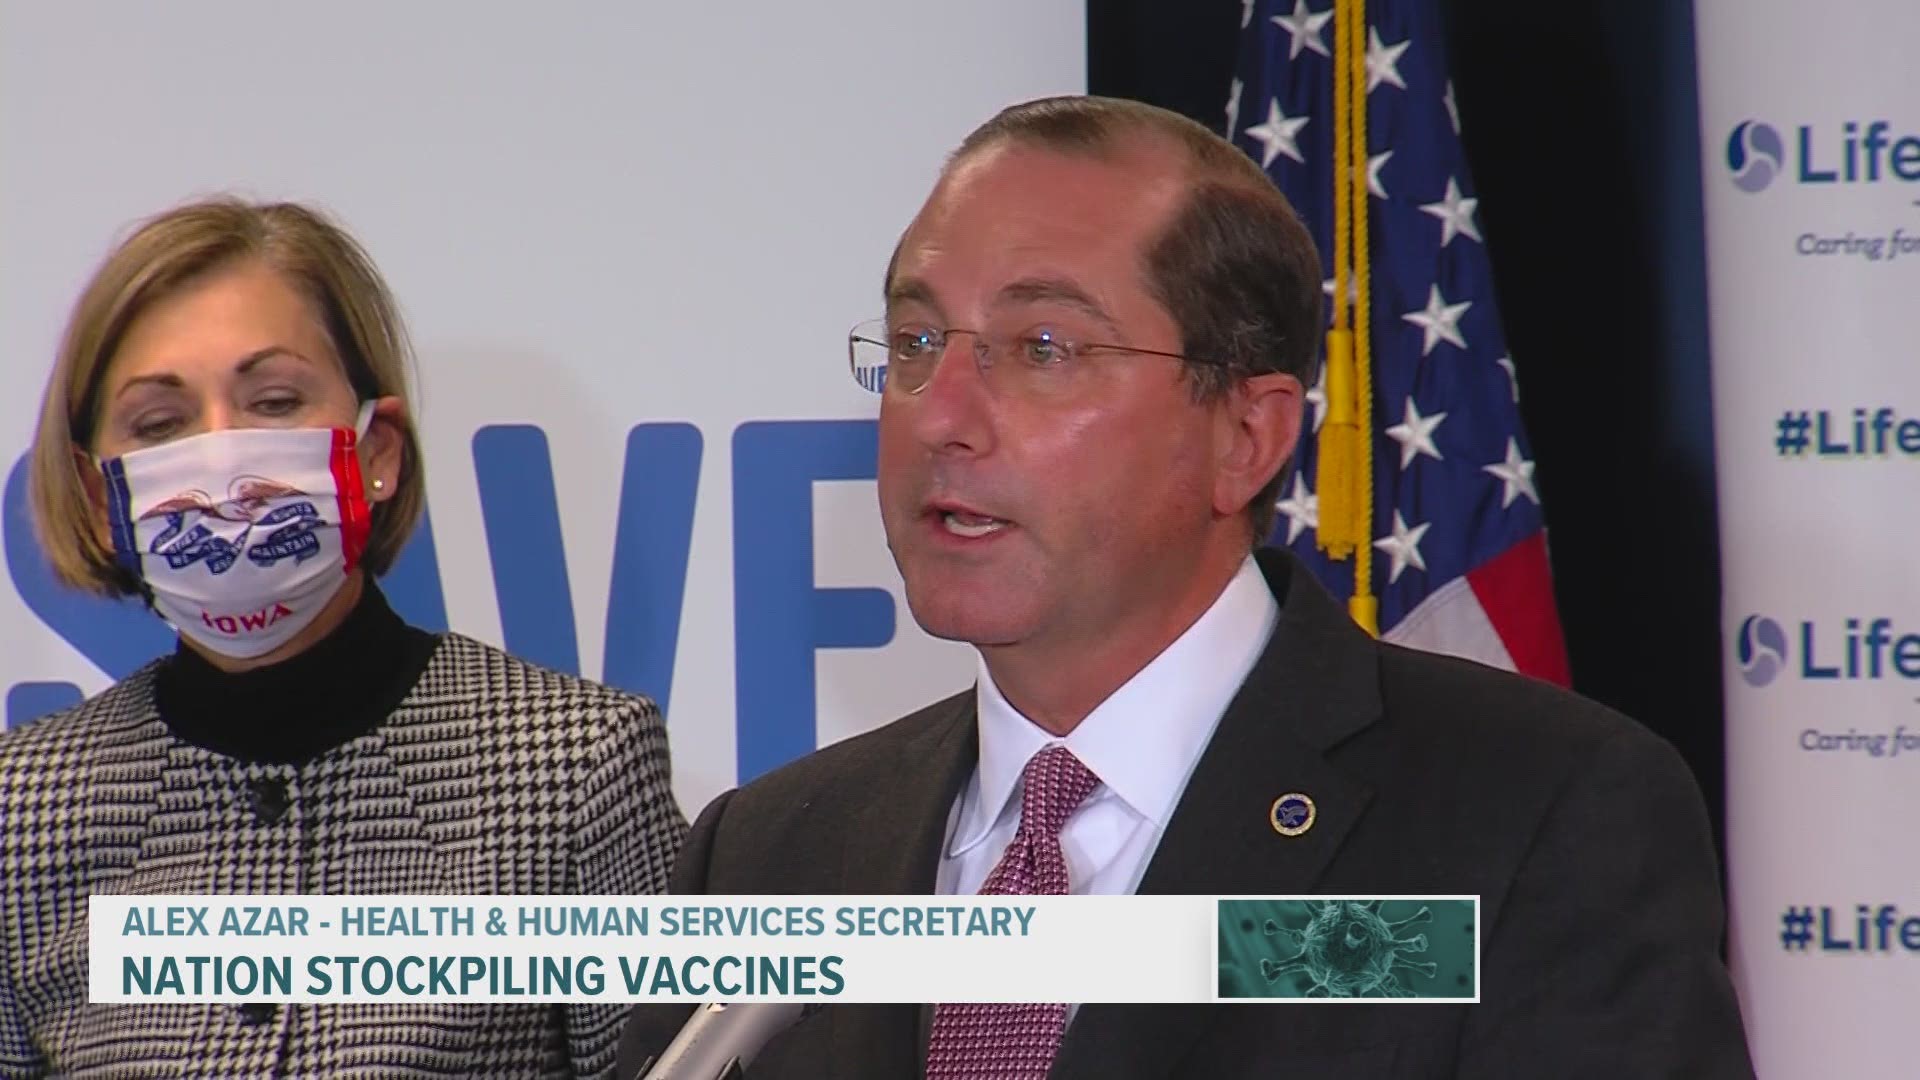 U.S. Health and Human Services Secretary Alex Azar visited Iowa Thursday to discuss the preparation of COVID-19 vaccines.